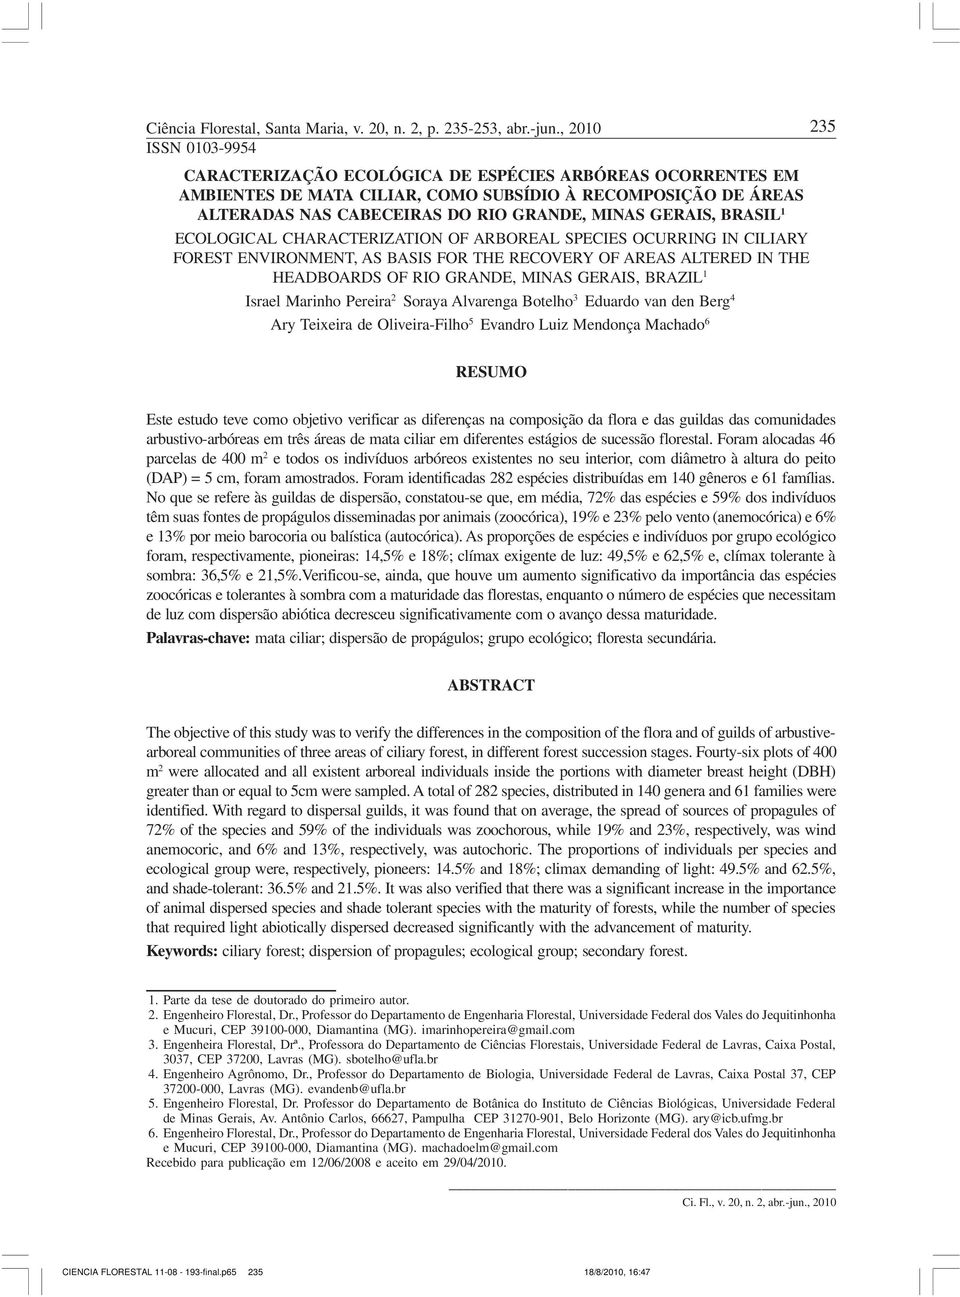 GERAIS, BRASIL 1 ECOLOGICAL CHARACTERIZATION OF ARBOREAL SPECIES OCURRING IN CILIARY FOREST ENVIRONMENT, AS BASIS FOR THE RECOVERY OF AREAS ALTERED IN THE HEADBOARDS OF RIO GRANDE, MINAS GERAIS,